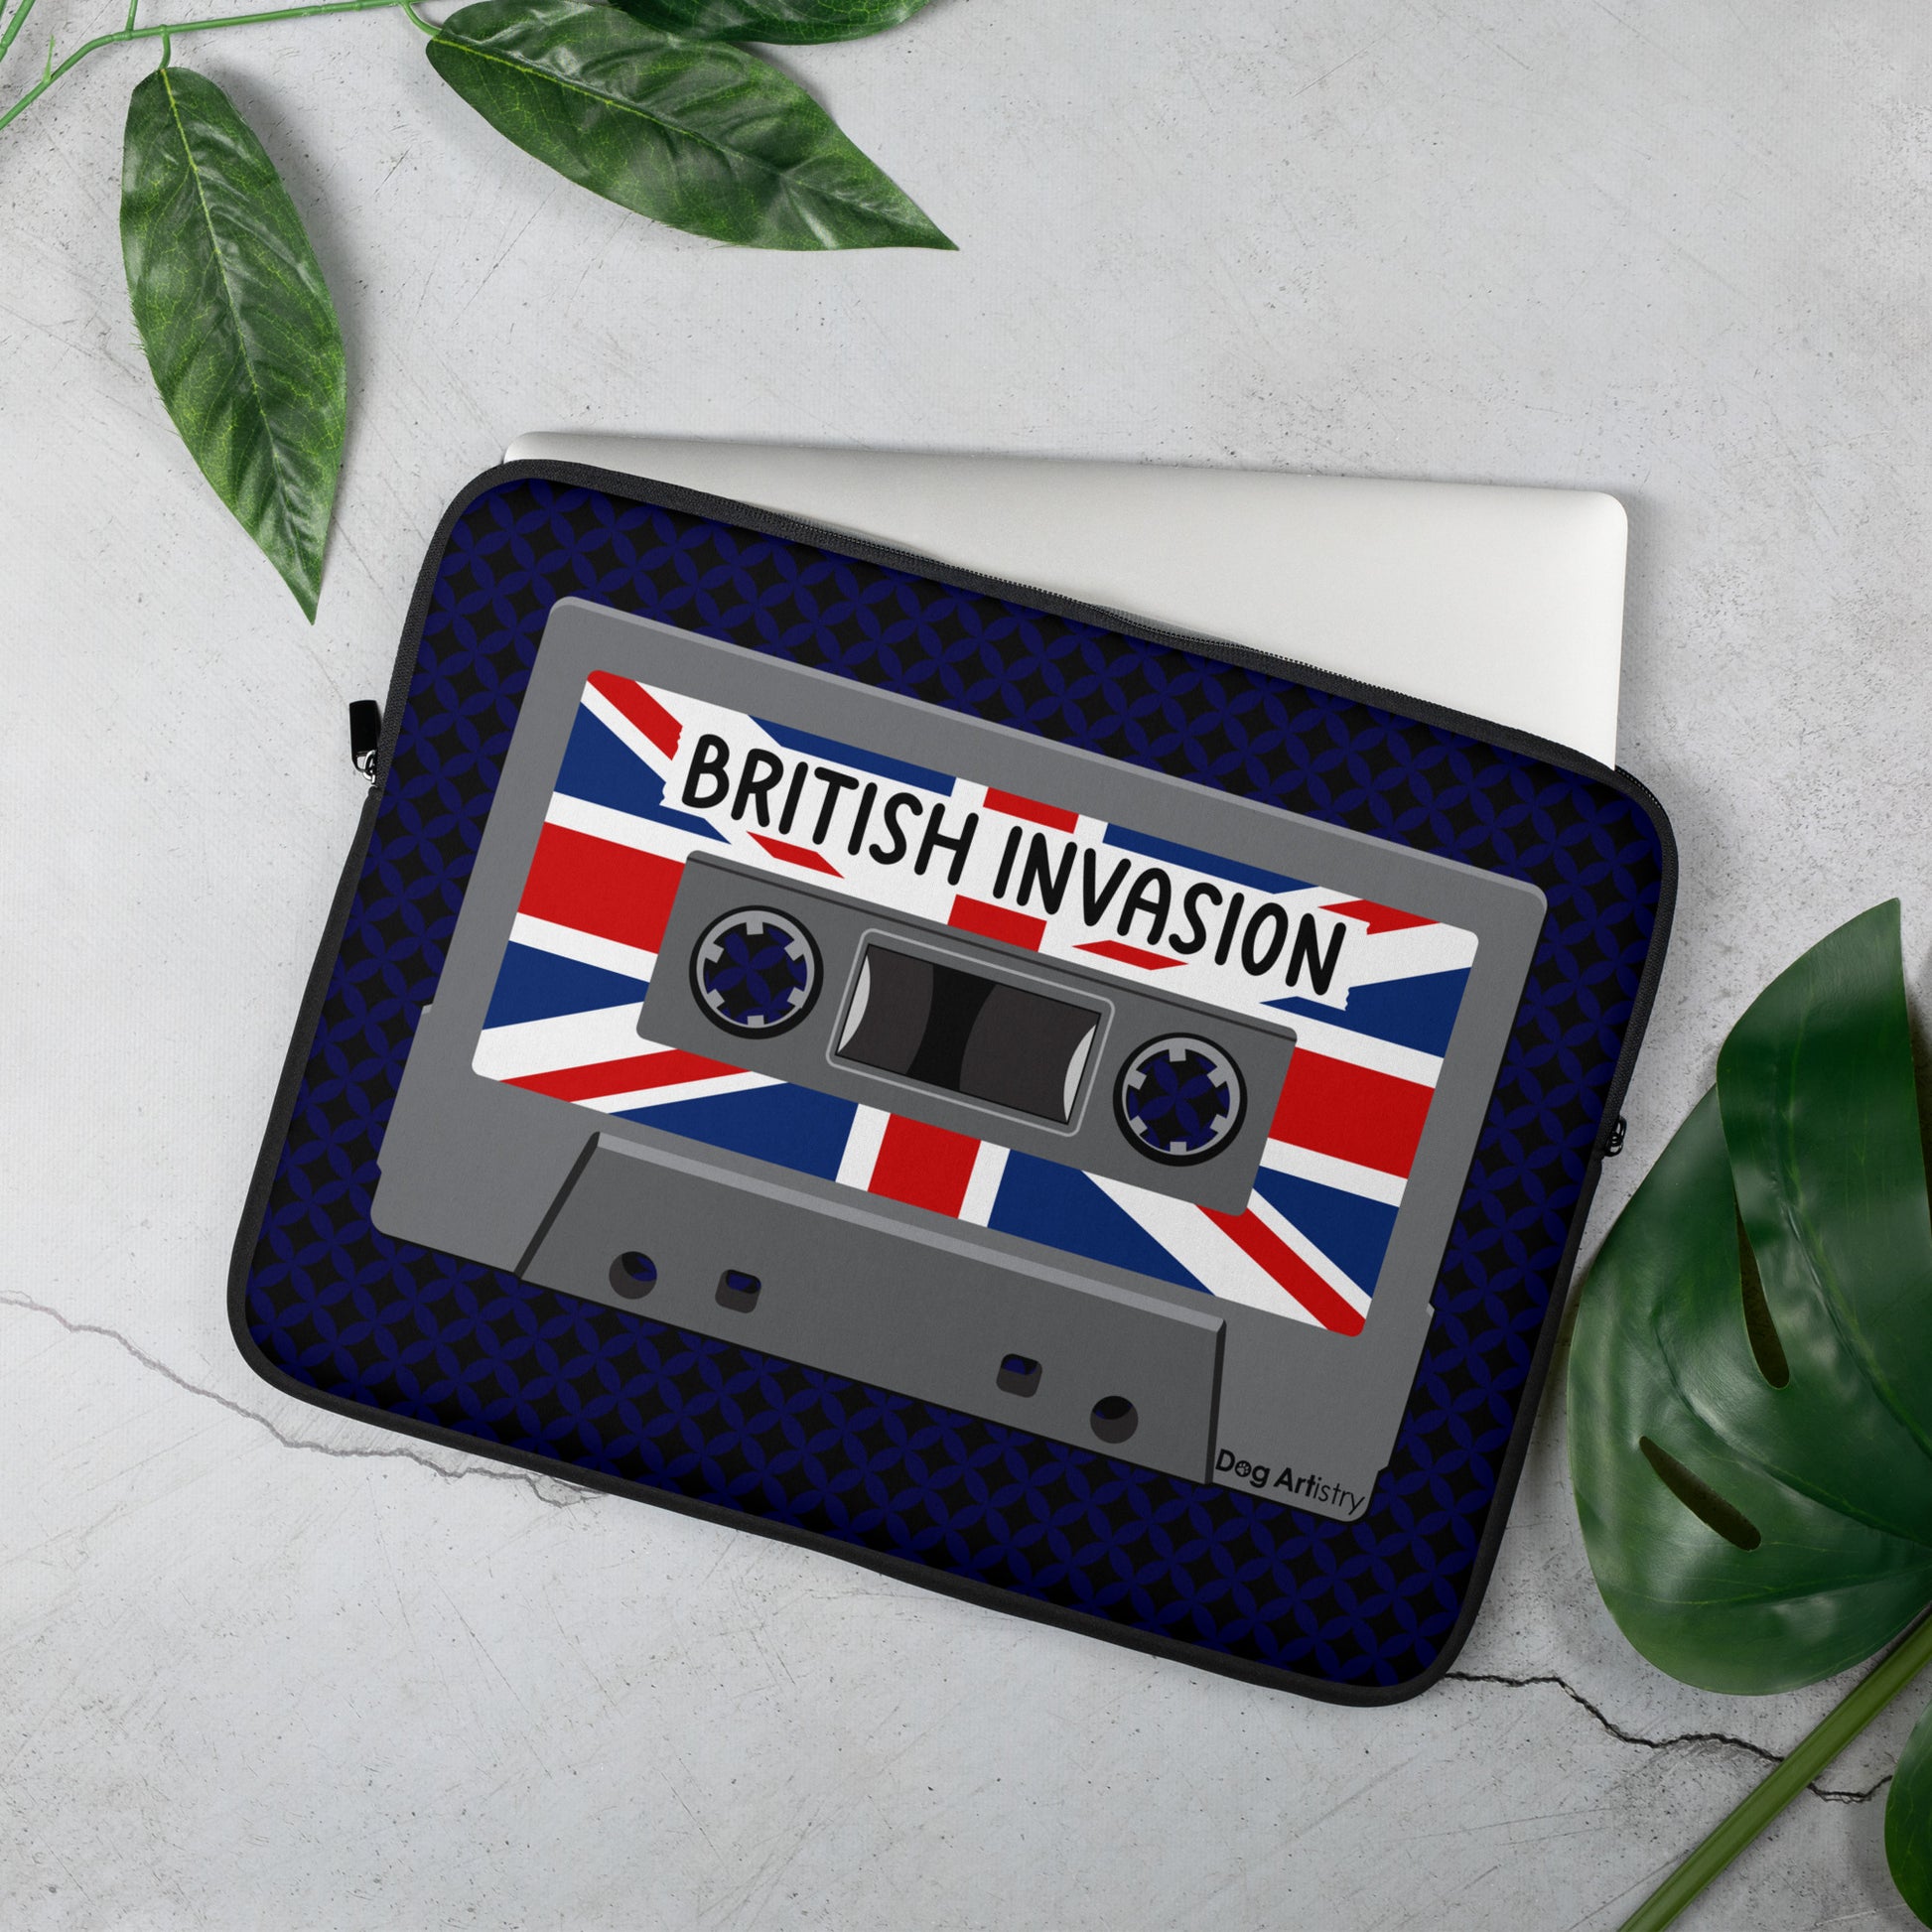 Cassette Tape British Invasion music with Union Jack flag on cassette laptop sleeve designed by Dog Artistry.